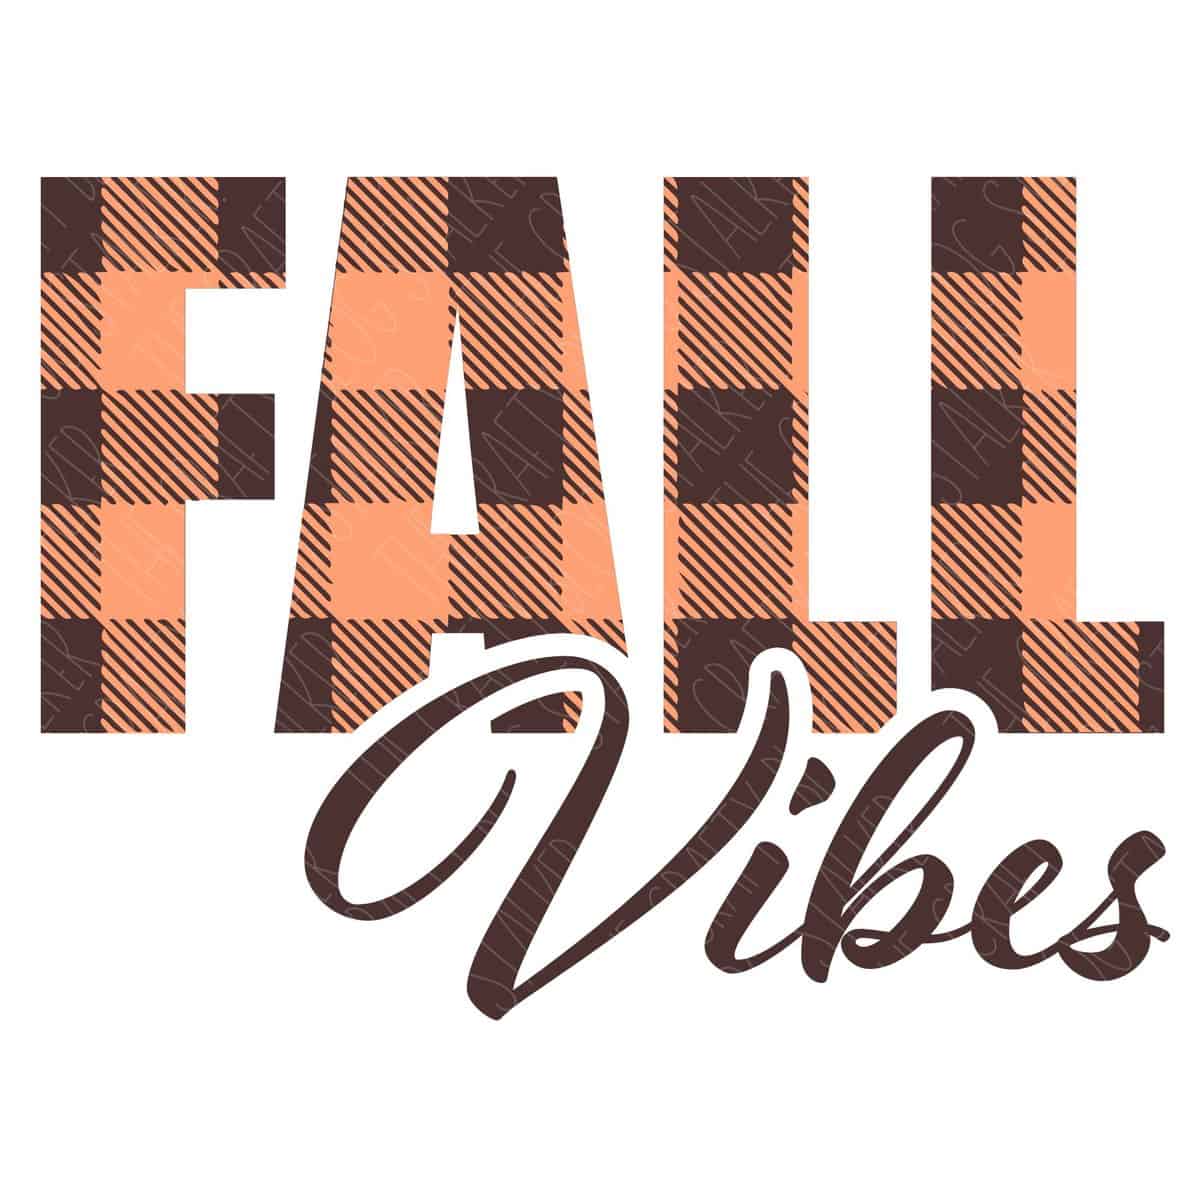 Fall Vibes SVG	

			
		
	

		
			$3.00 – Buy Now Checkout
							
					
						
							
						
						Added to cart